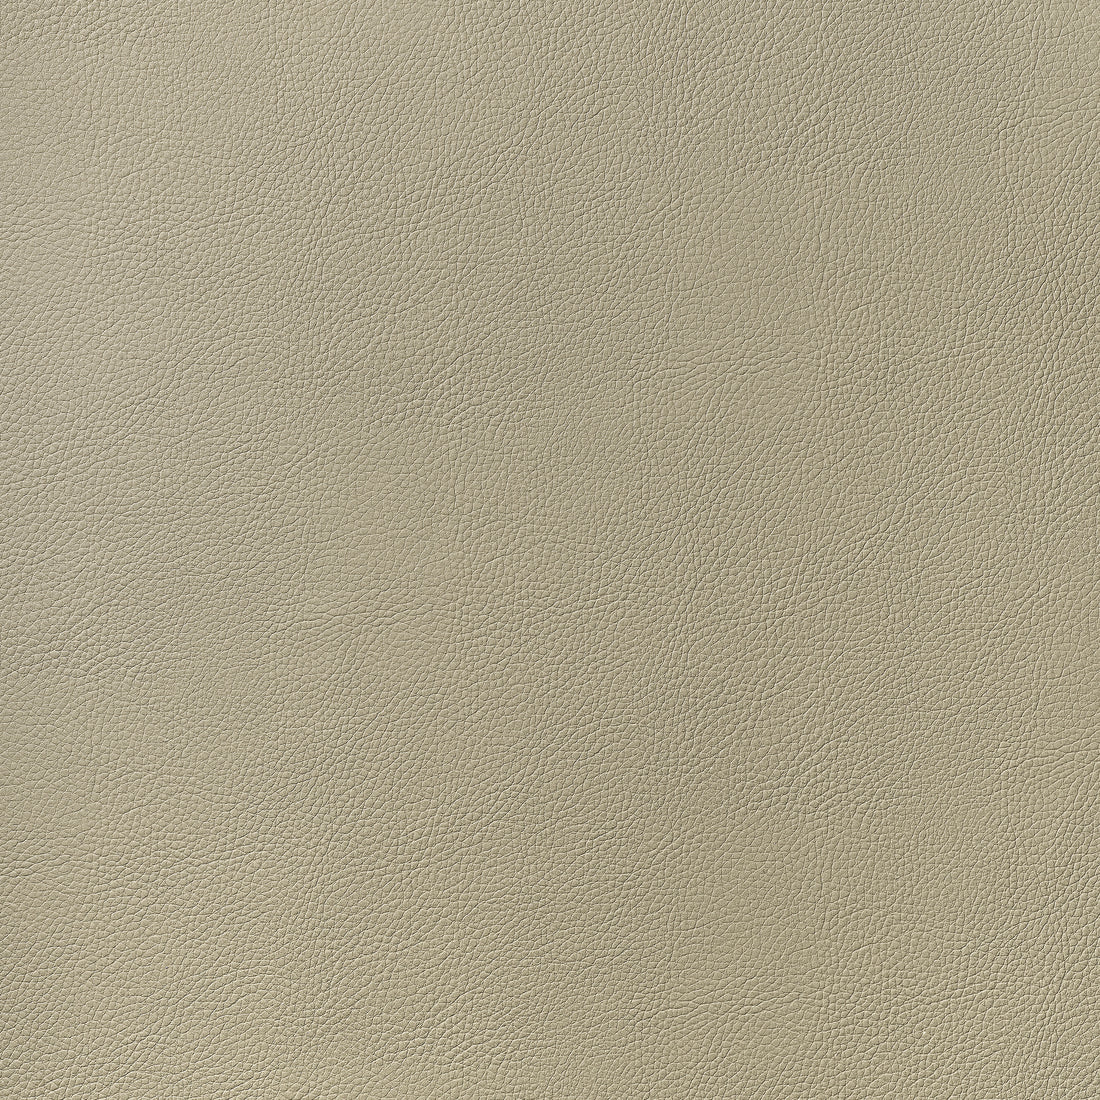 Arcata fabric in dune color - pattern number W78383 - by Thibaut in the  Sierra collection